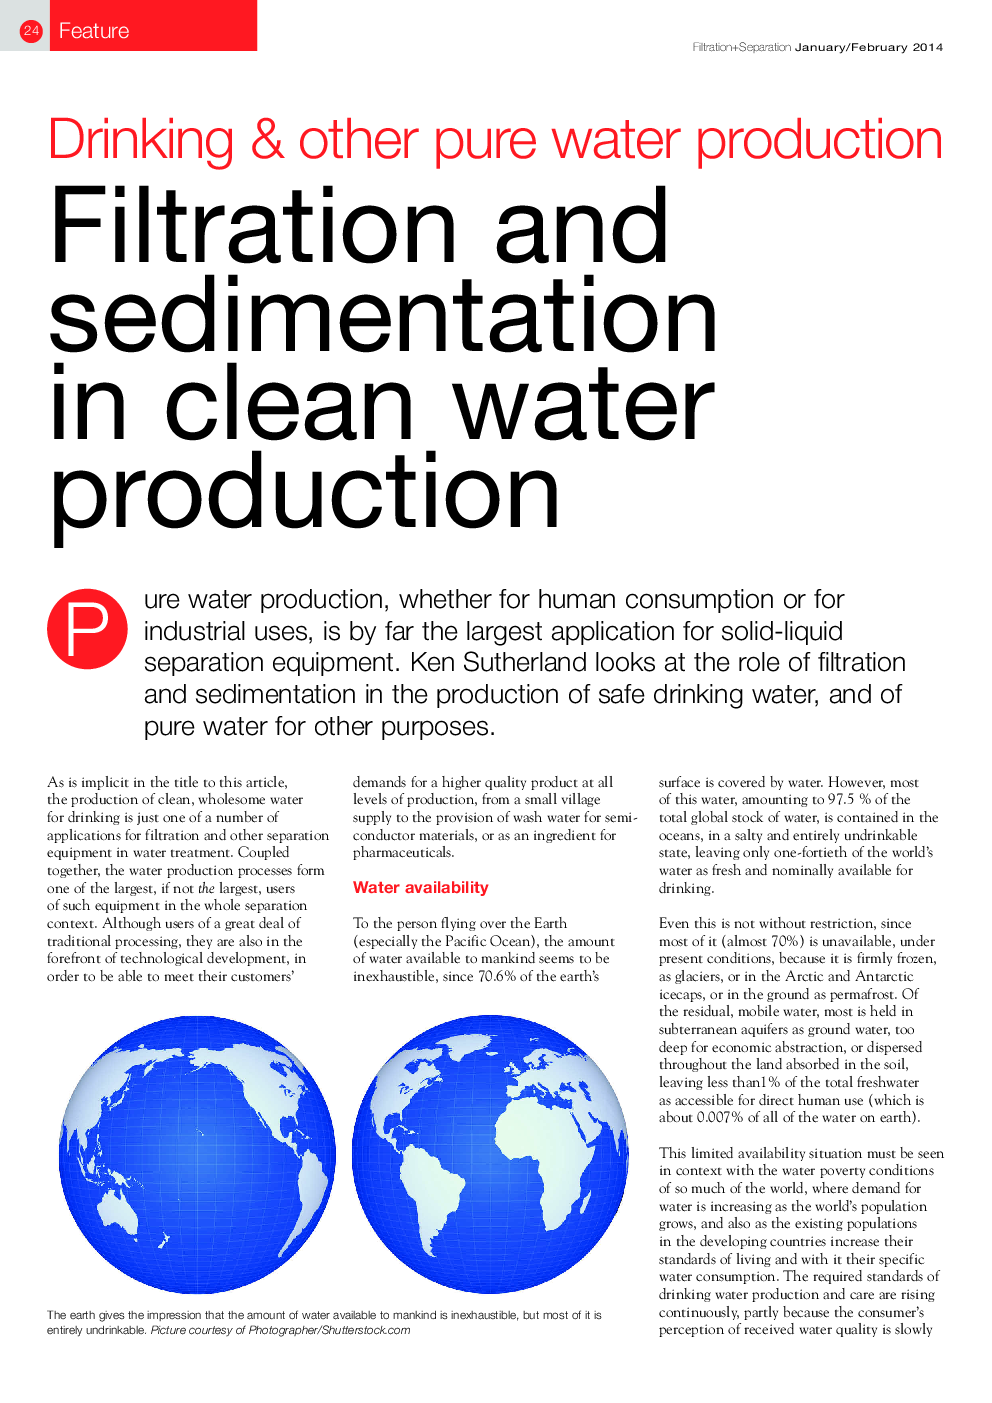 Drinking & other pure water production: Filtration and sedimentation in clean water production